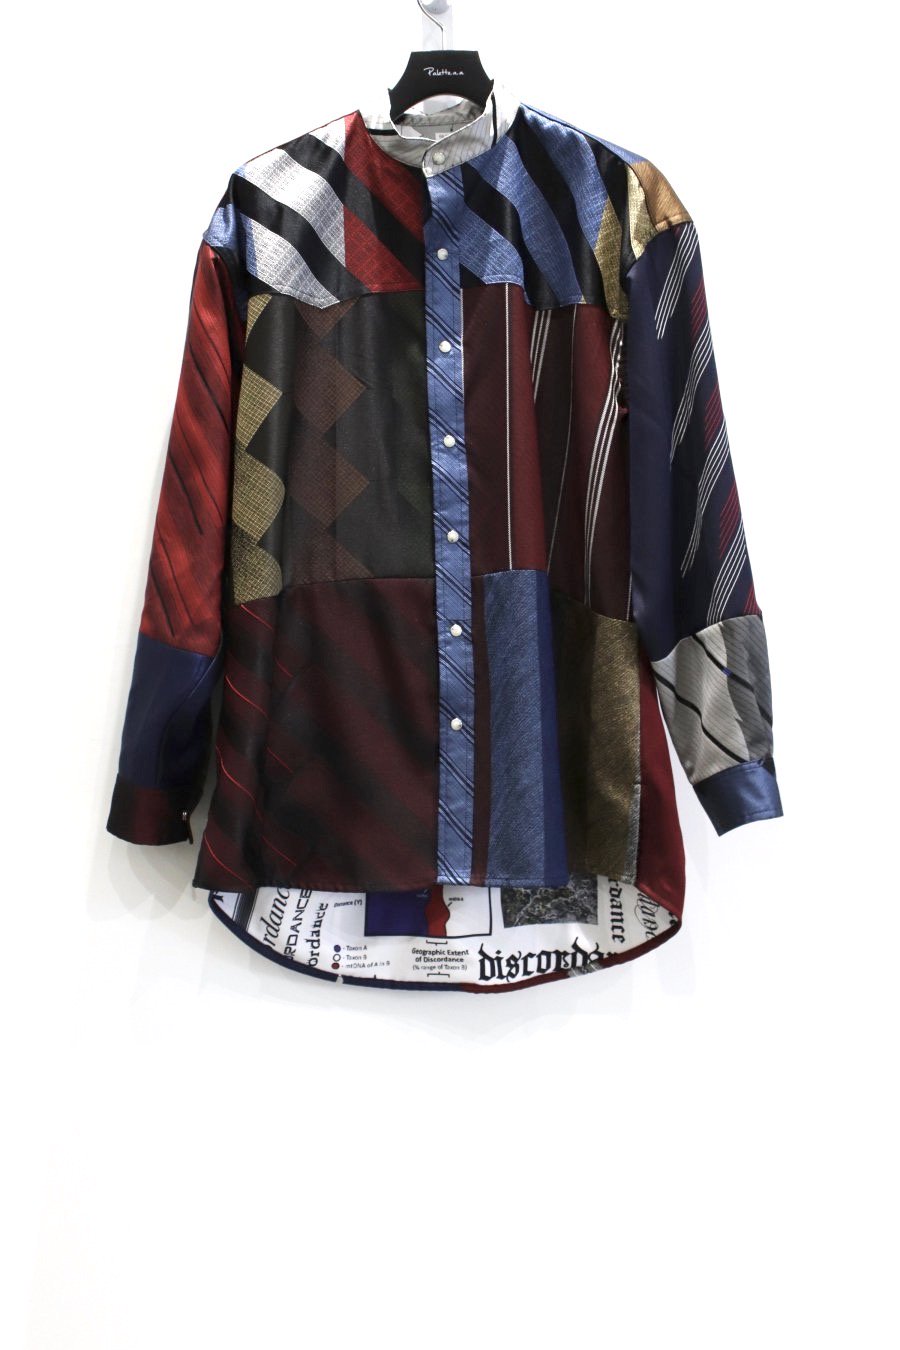 Children of the discordance  VINTAGE SILKTEX PATCHWORK SHIRT<img class='new_mark_img2' src='https://img.shop-pro.jp/img/new/icons15.gif' style='border:none;display:inline;margin:0px;padding:0px;width:auto;' />